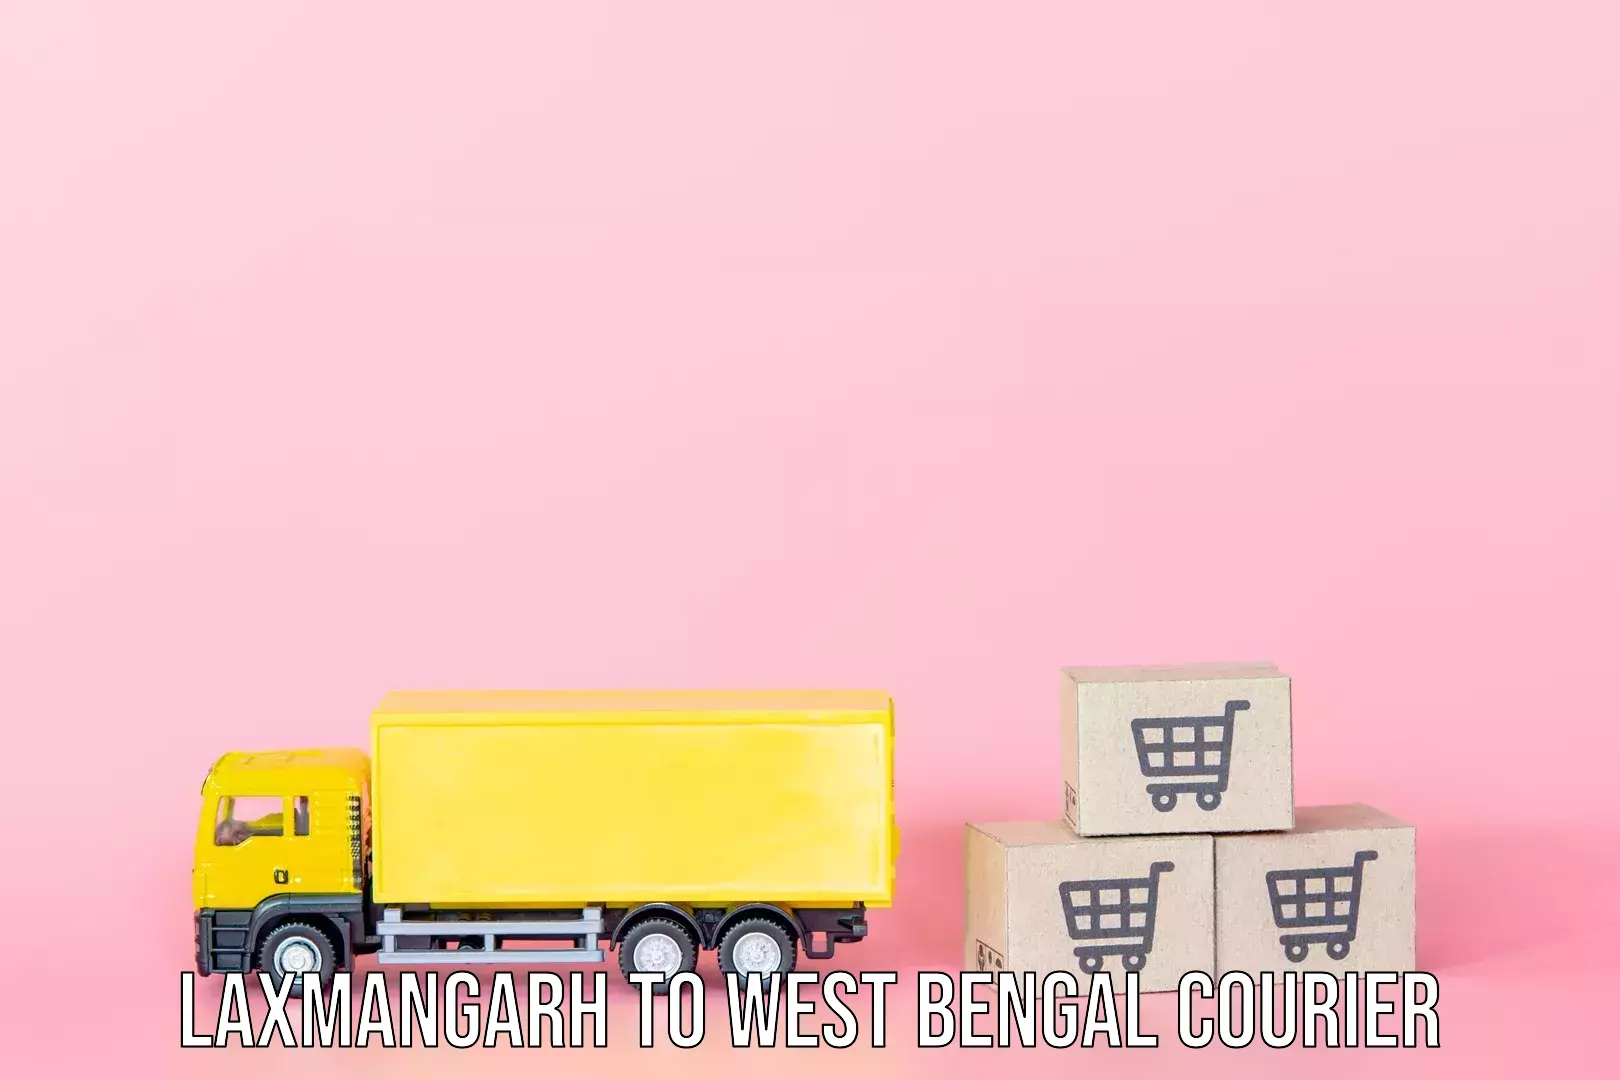 Baggage transport network Laxmangarh to West Bengal